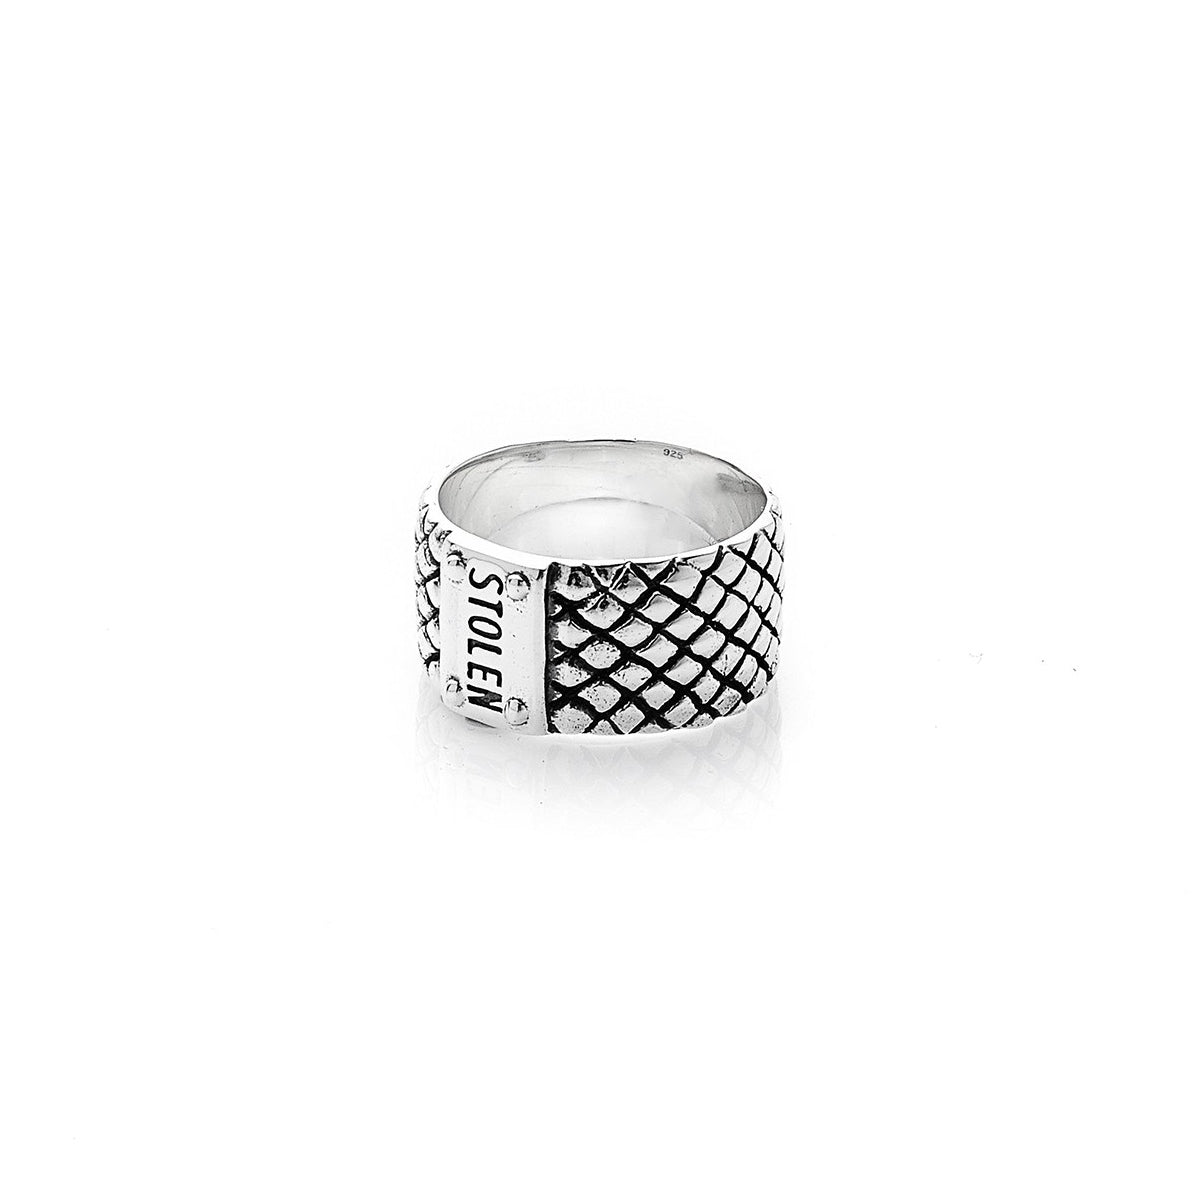 STOLEN GIRLFRIENDS CLUB SNAKE BAND WIDE RING  The Stolen Girlfriends Club Snake Band Wide Ring is a edgy textured ring, featuring a snake skin pattern around the outer ring, finished with a signature 'STOLEN' branded plaque. Simple, edgy and stylish, wear The Stolen Girlfriends Club Snake Band Wide Ring daily or for your chosen occasion.  